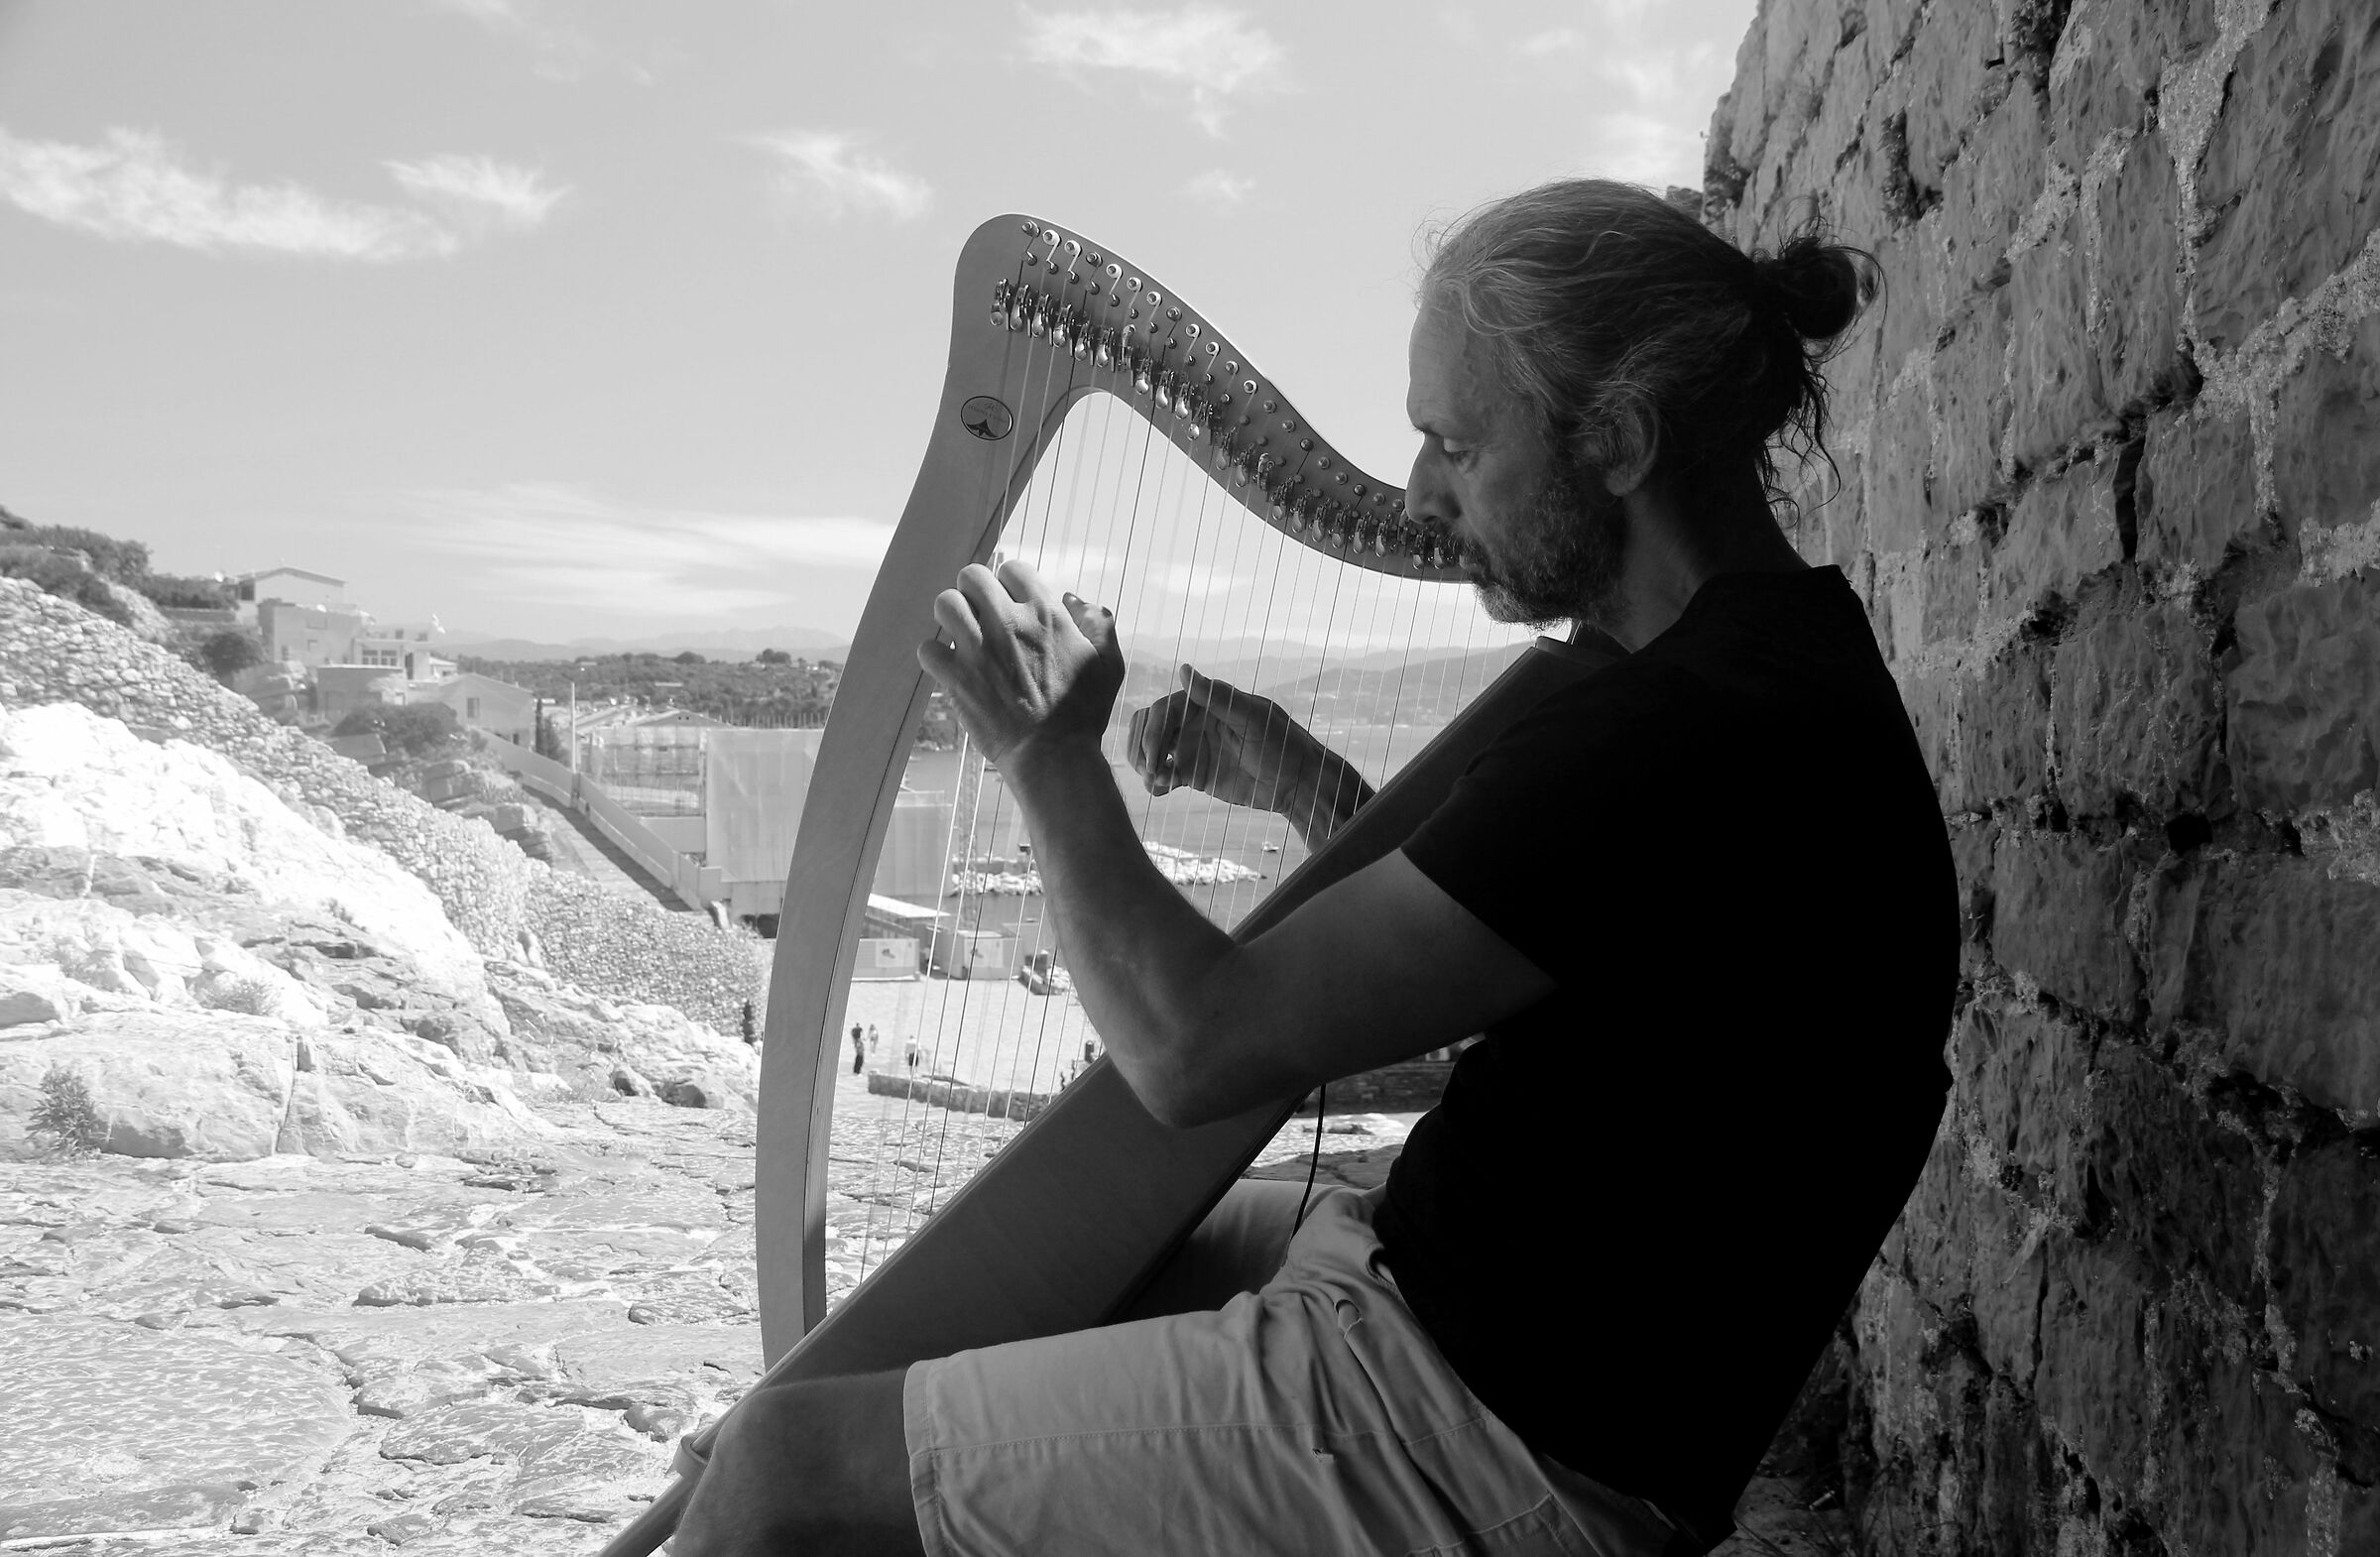 THE MASTER AND THE HARP...